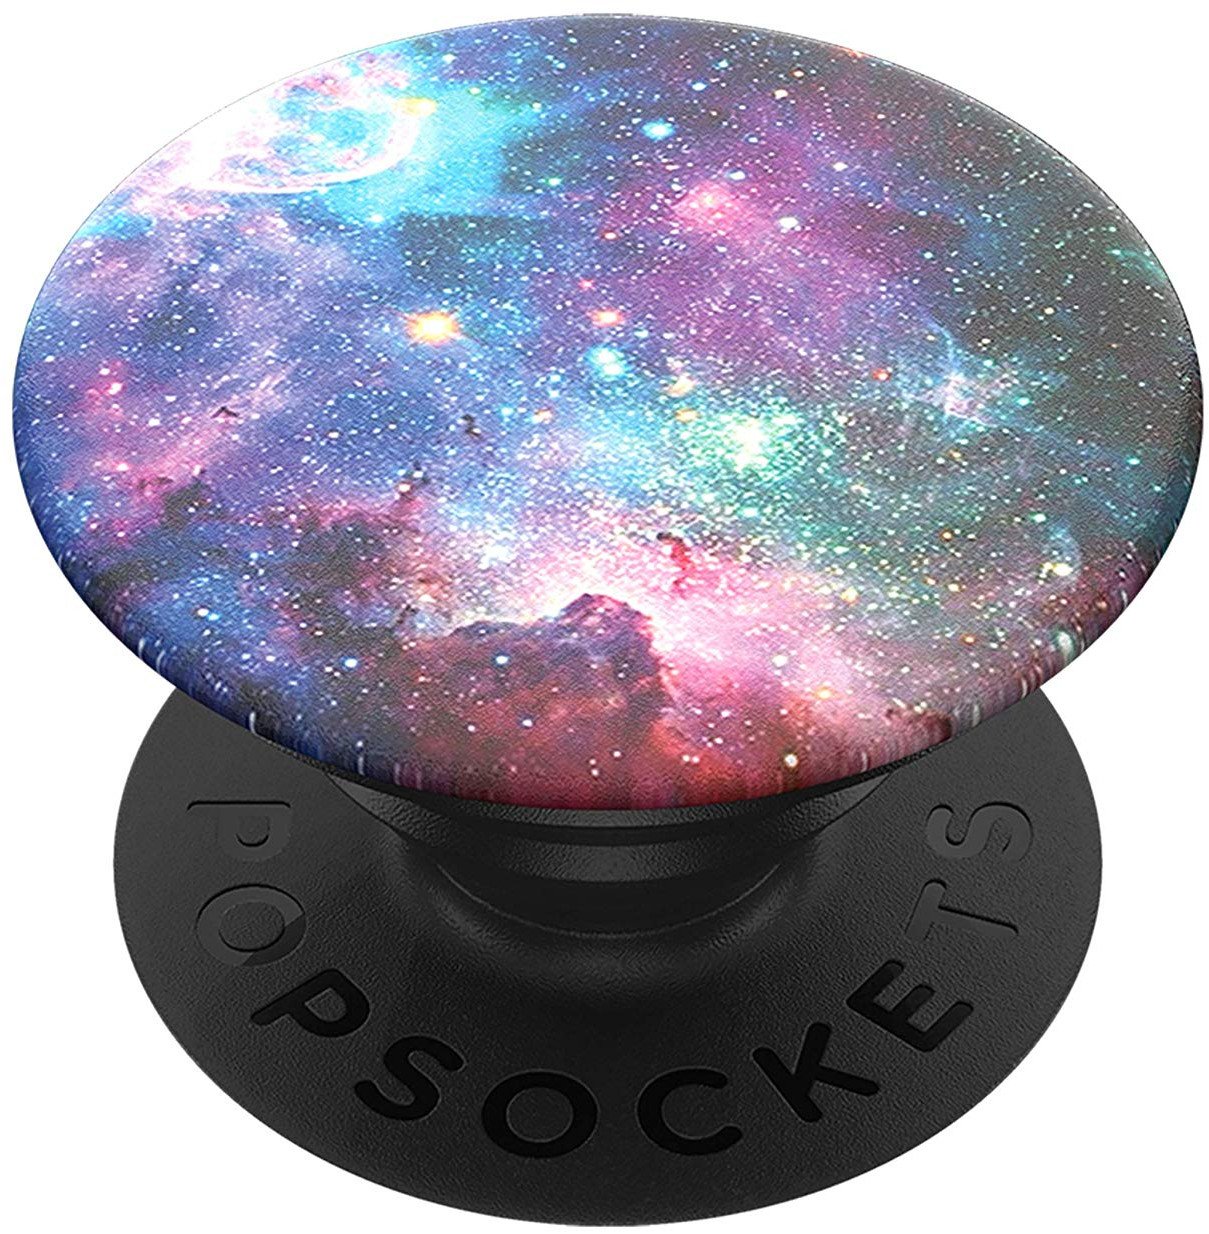 https://www.androidcentral.com/sites/androidcentral.com/files/article_images/2020/03/popsockets-popgrip-stand-rendered.jpg?itok=U8l0qnrO